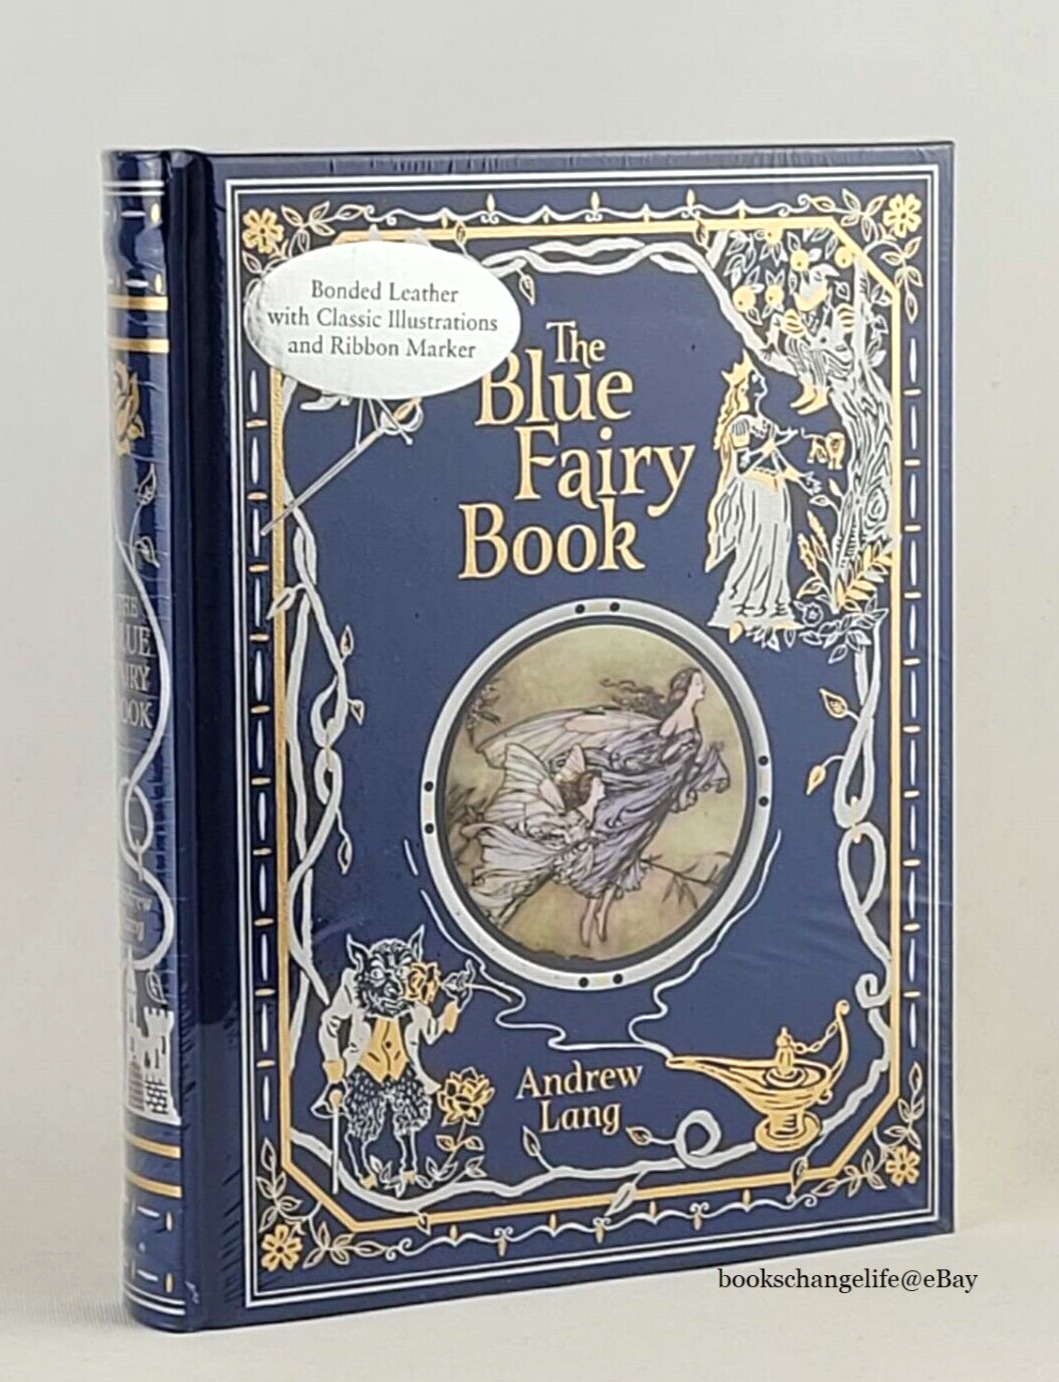 THE BLUE FAIRY BOOK Andrew Lang Illustrated Bonded Leather Gilded Pages *SEALED*